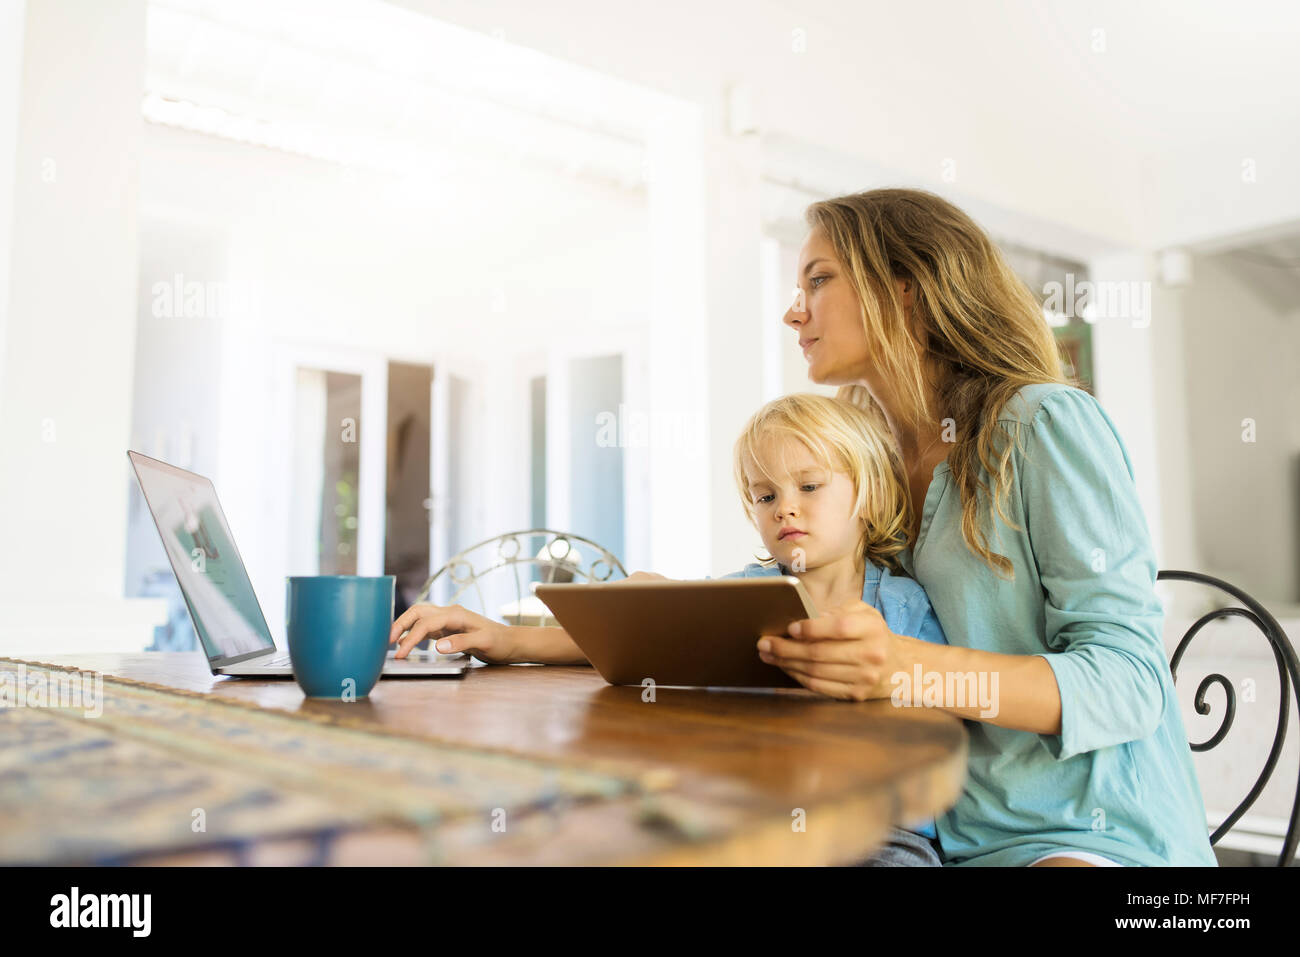 Boy sitting on his mother's lap and looking at a tablet while his mother is working on a laptop Stock Photo